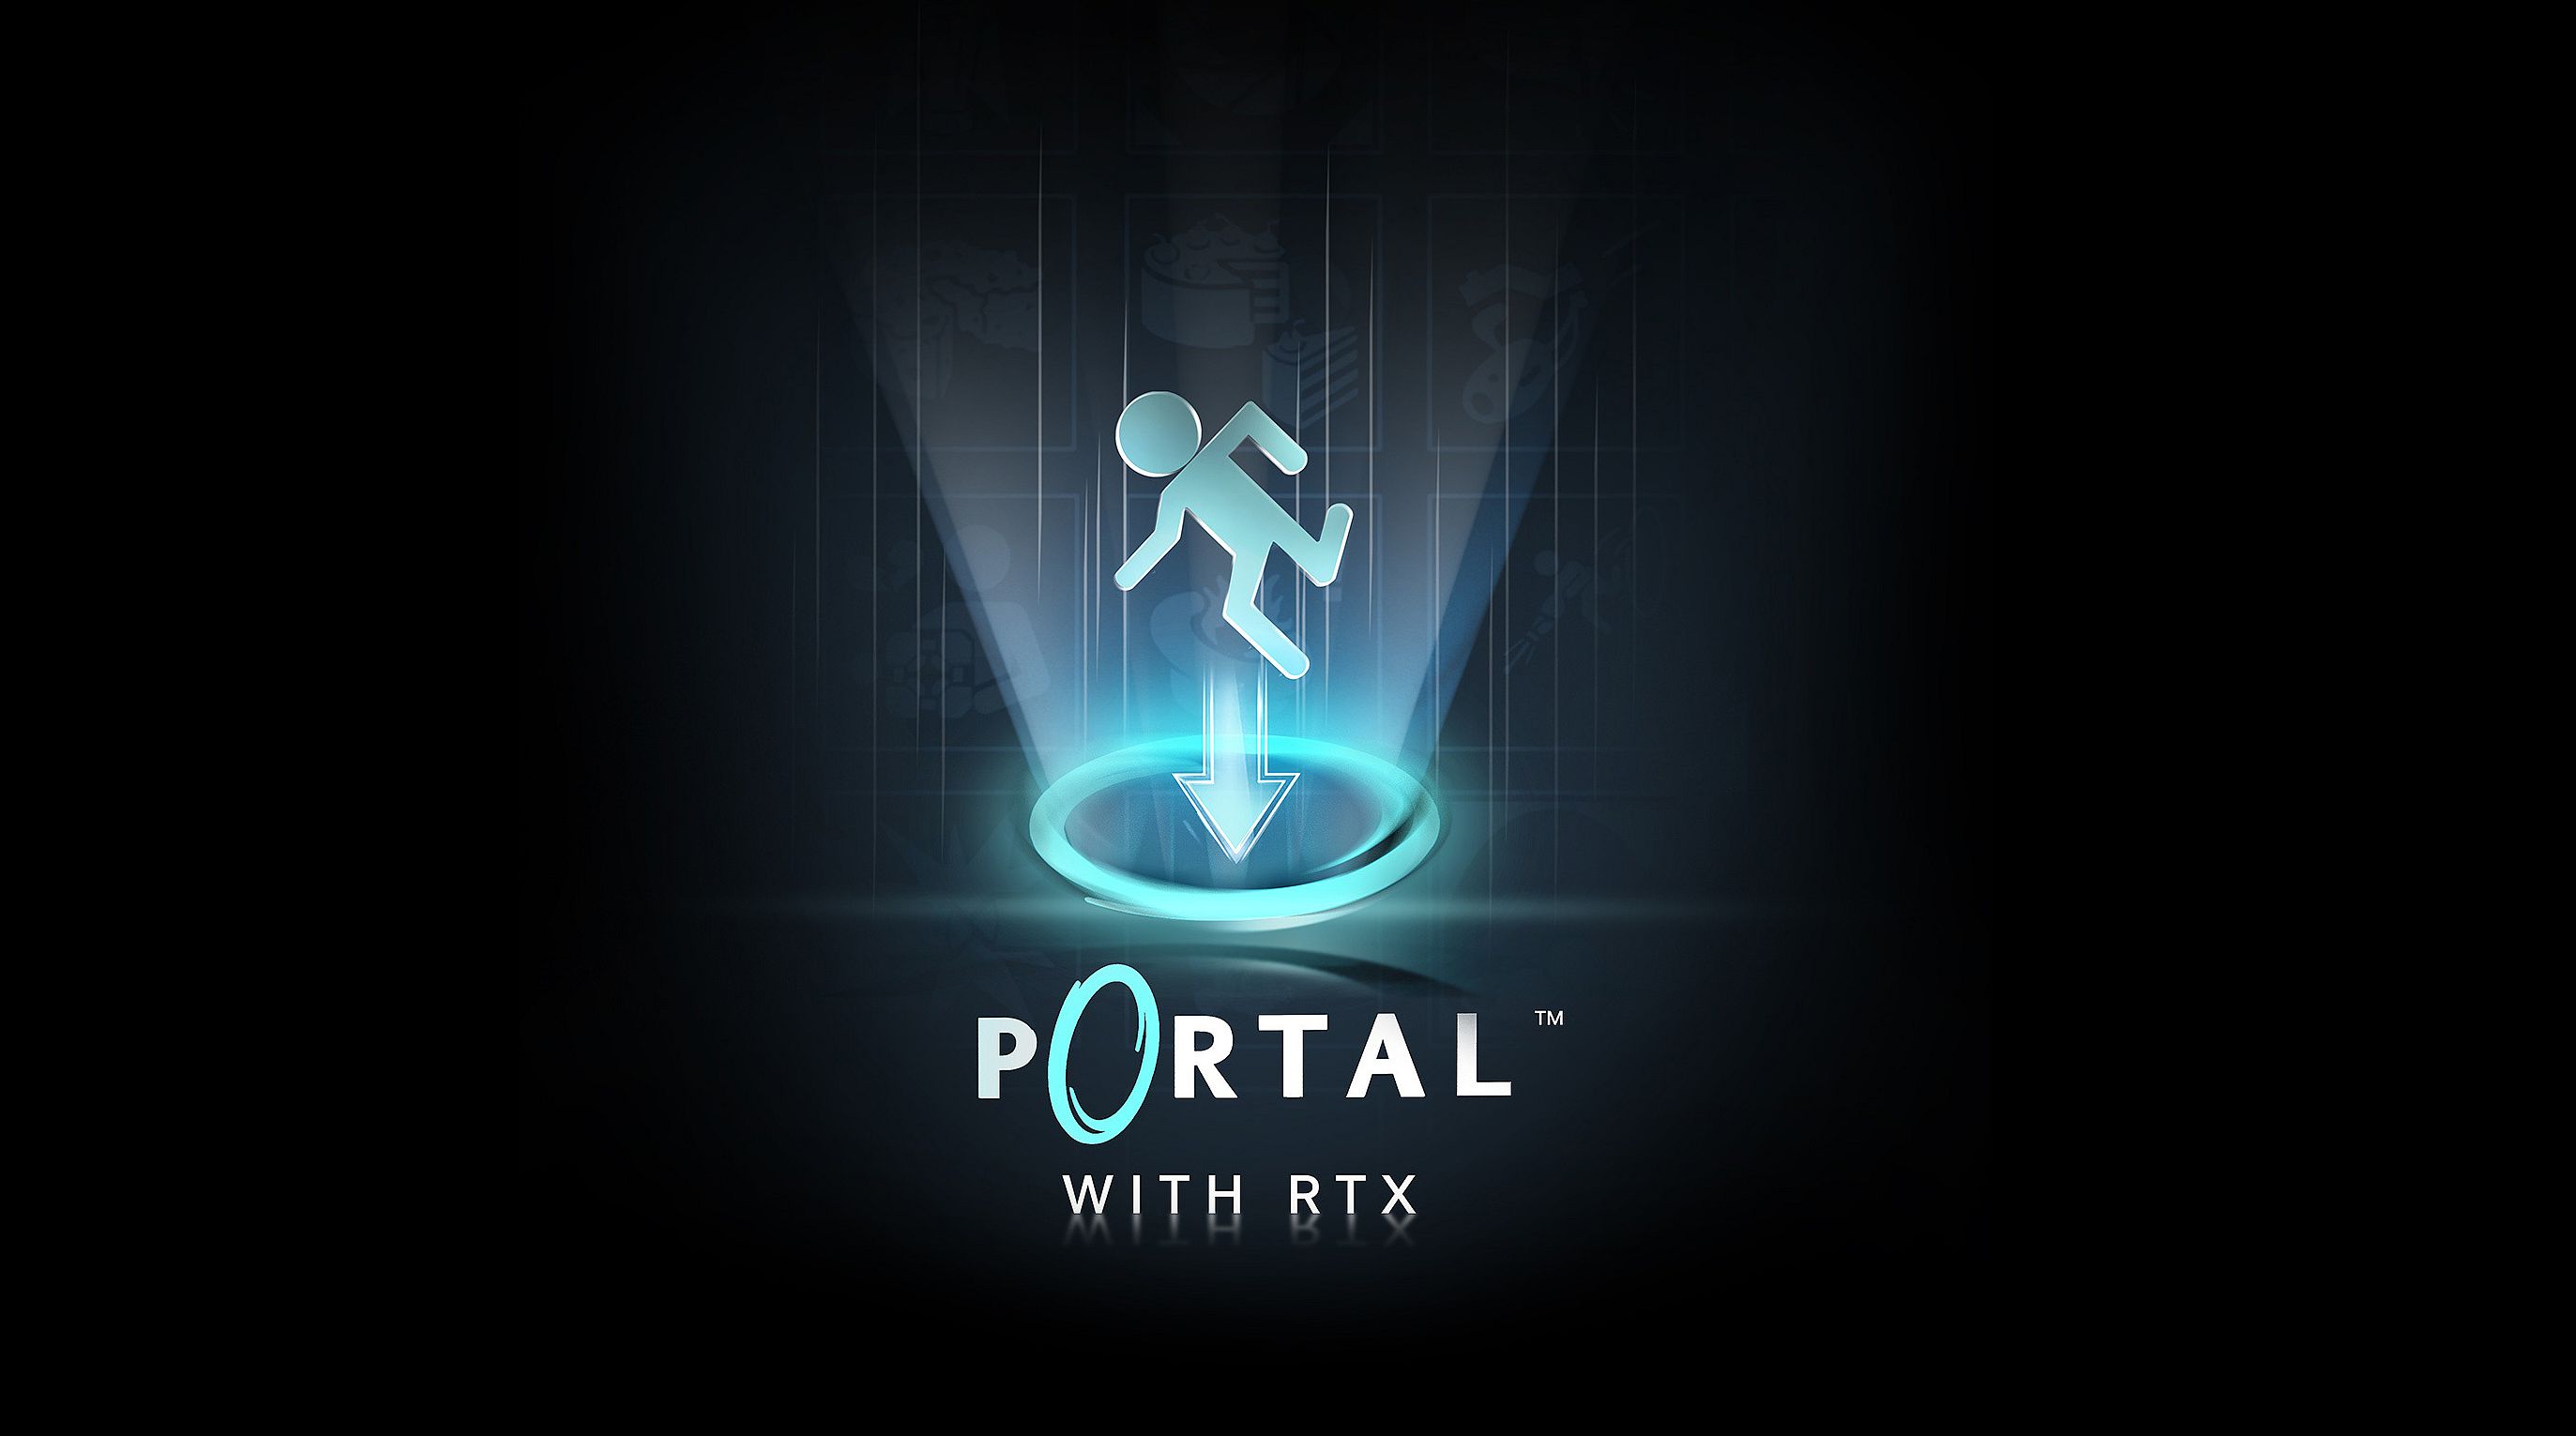 Image for Nvidia's Portal with RTX hits December 8, expect advanced graphics features such as DLSS 3, and more